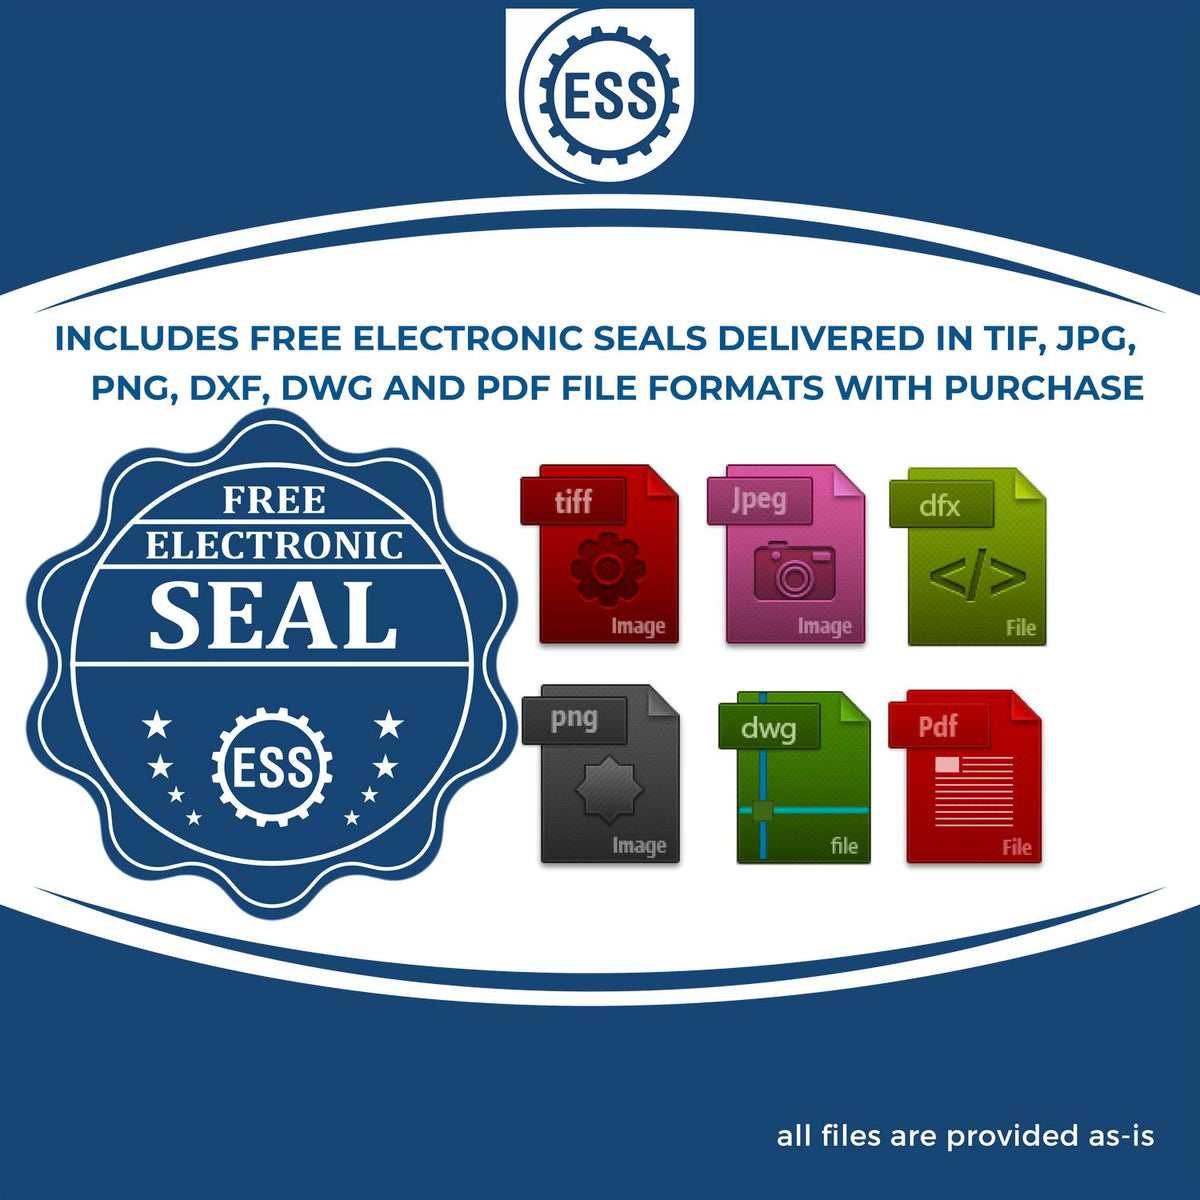 An infographic for the free electronic seal for the State of Louisiana Long Reach Architectural Embossing Seal illustrating the different file type icons such as DXF, DWG, TIF, JPG and PNG.